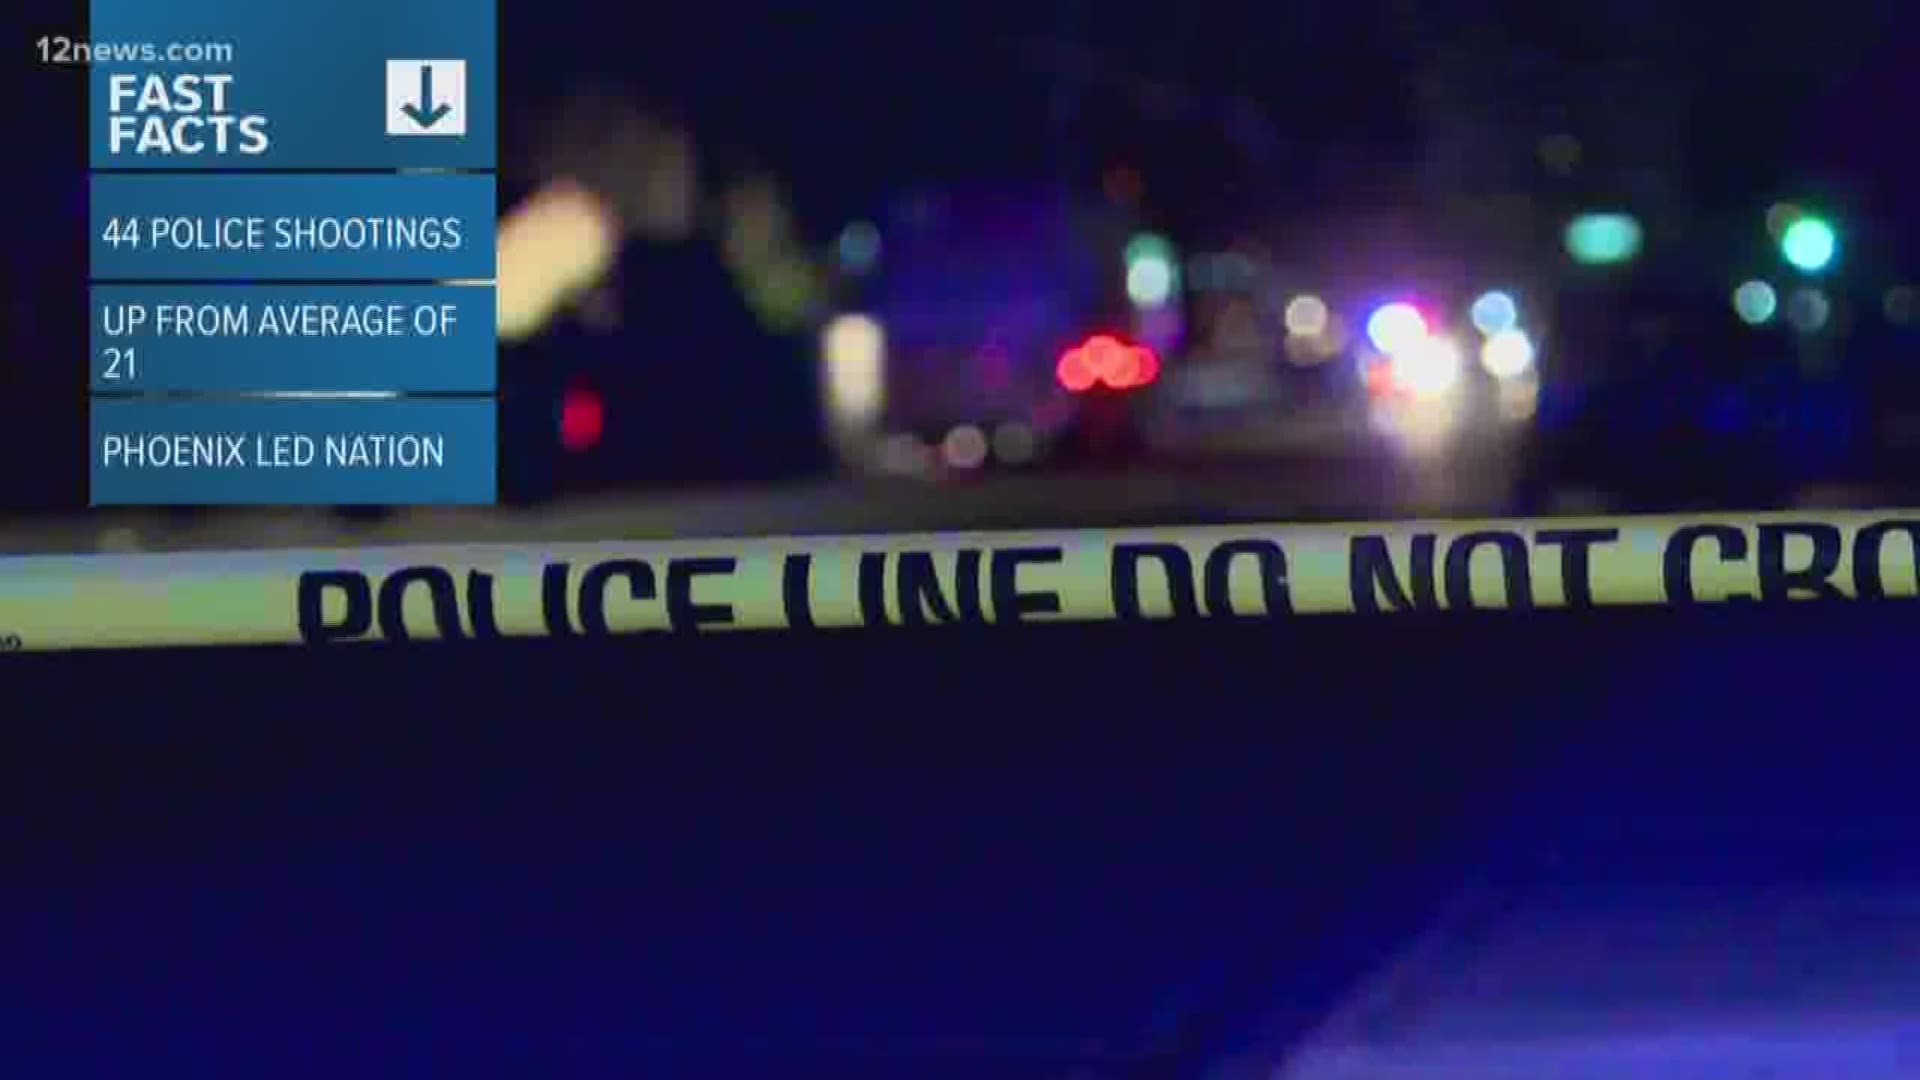 There were 44 officer-involved shootings by the Phoenix Police Department in 2018. Researchers took a deep dive and gave the city recommendations.